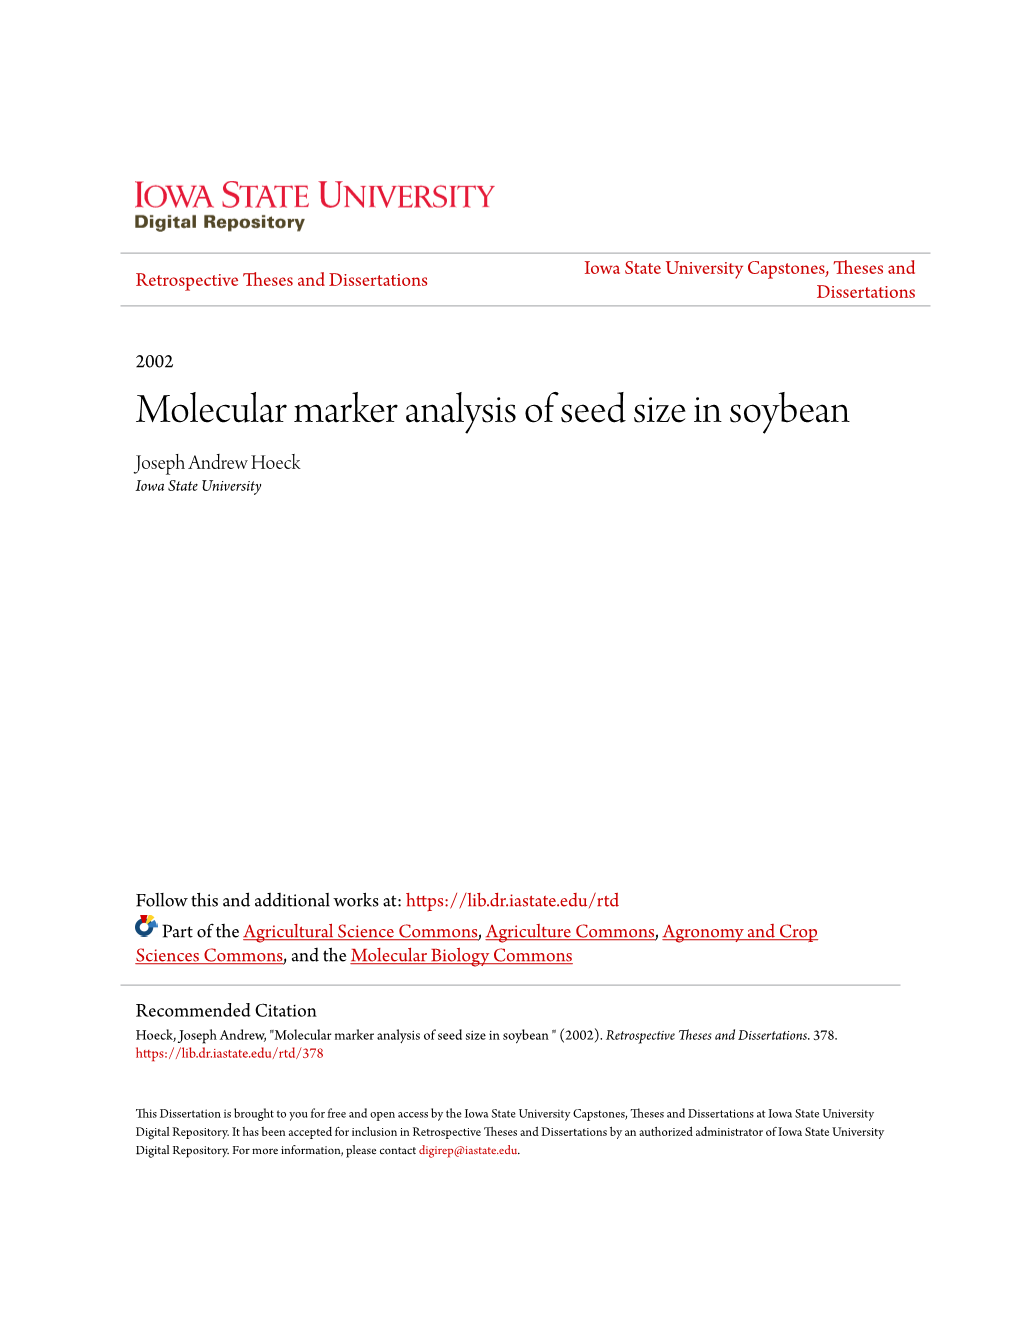 Molecular Marker Analysis of Seed Size in Soybean Joseph Andrew Hoeck Iowa State University